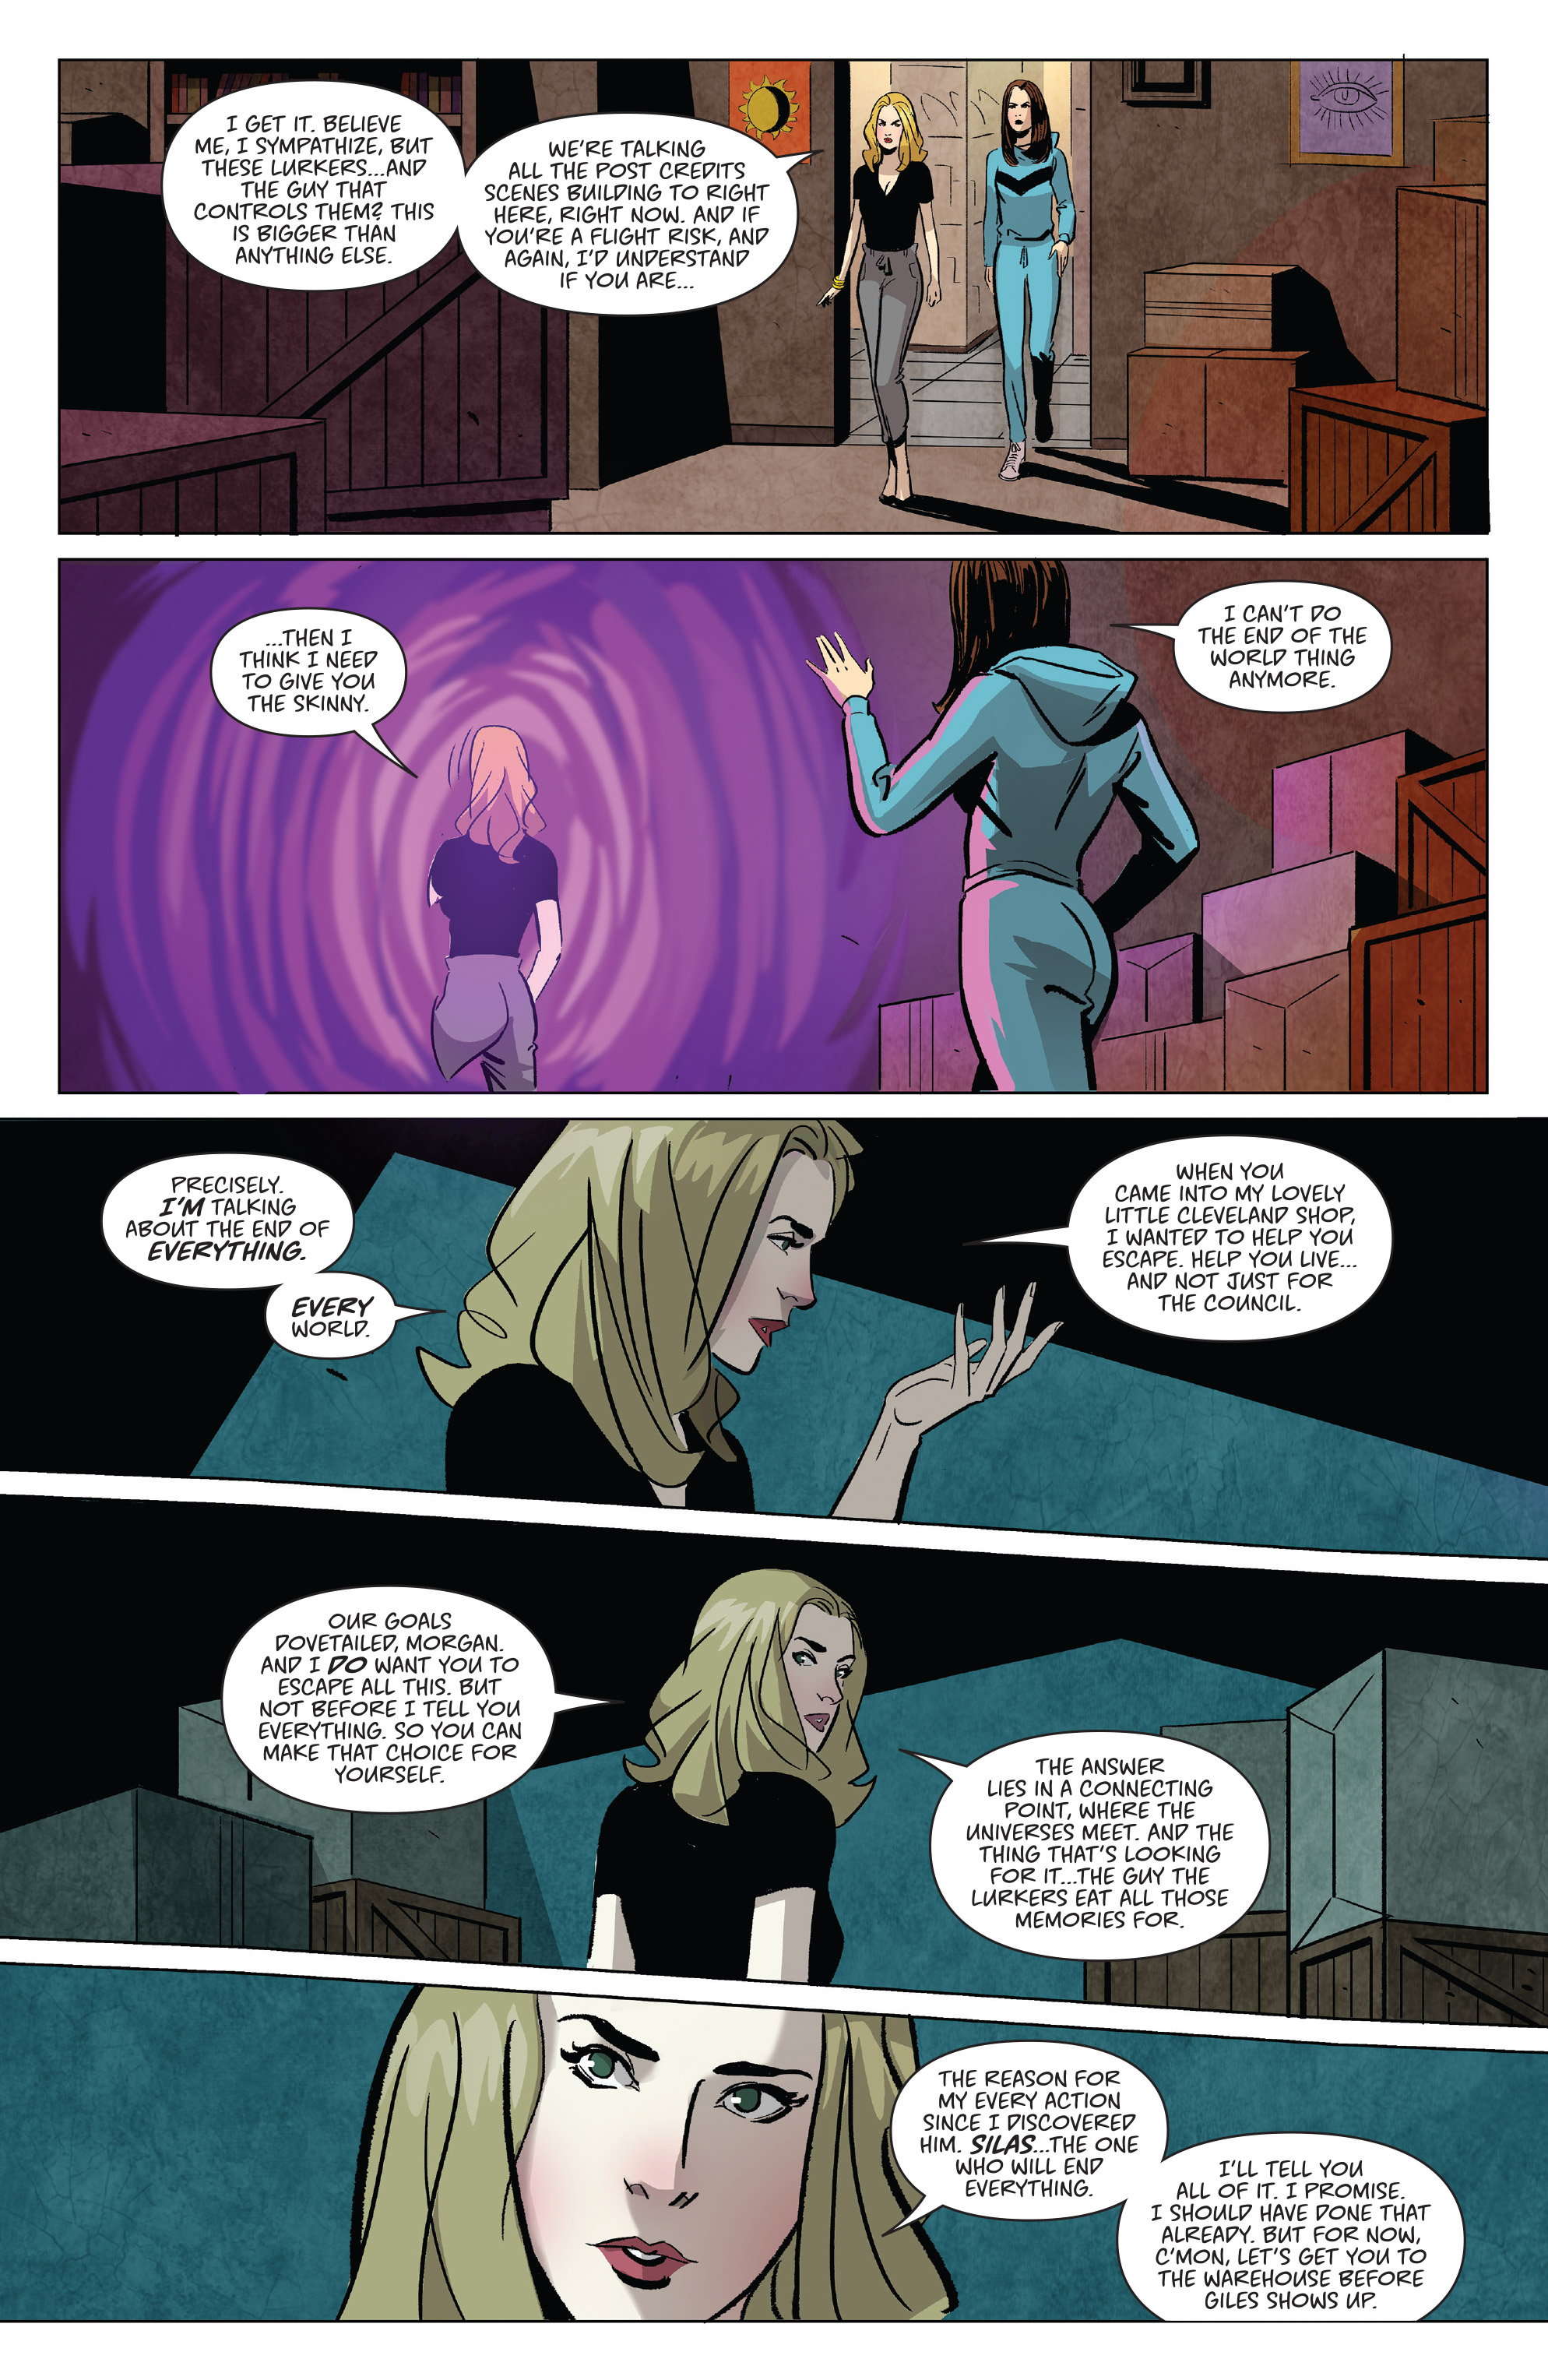 Buffy The Vampire Slayer 2019 Chapter 26 Page 4 7008